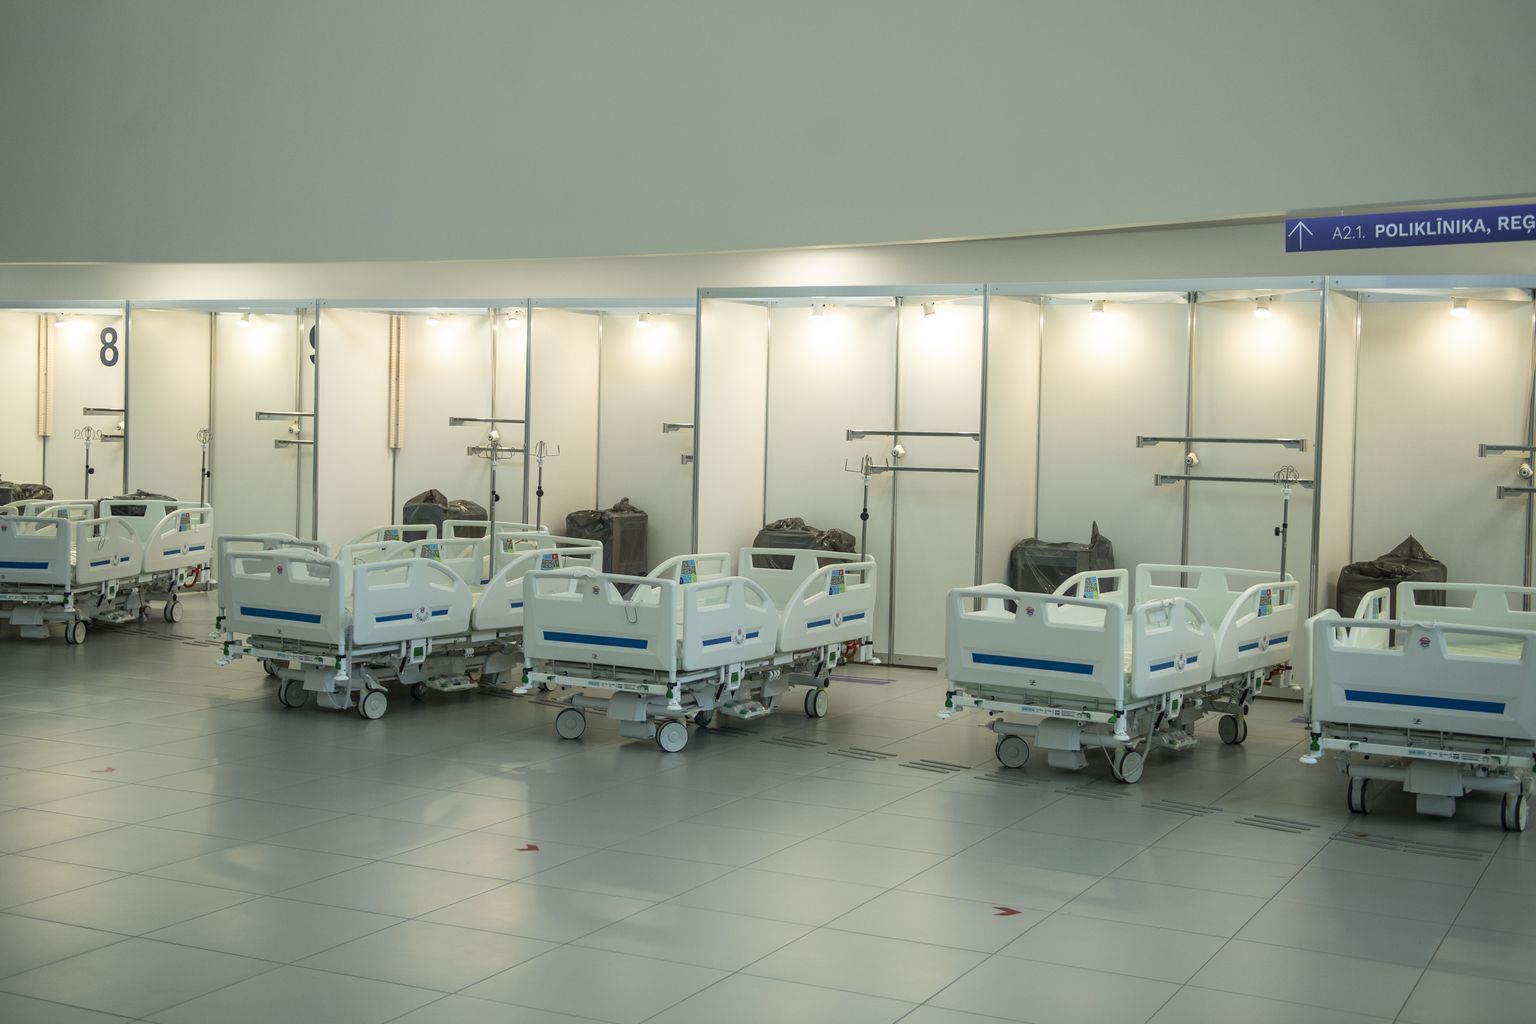 Additional beds in the lobby of Stradiņi hospital